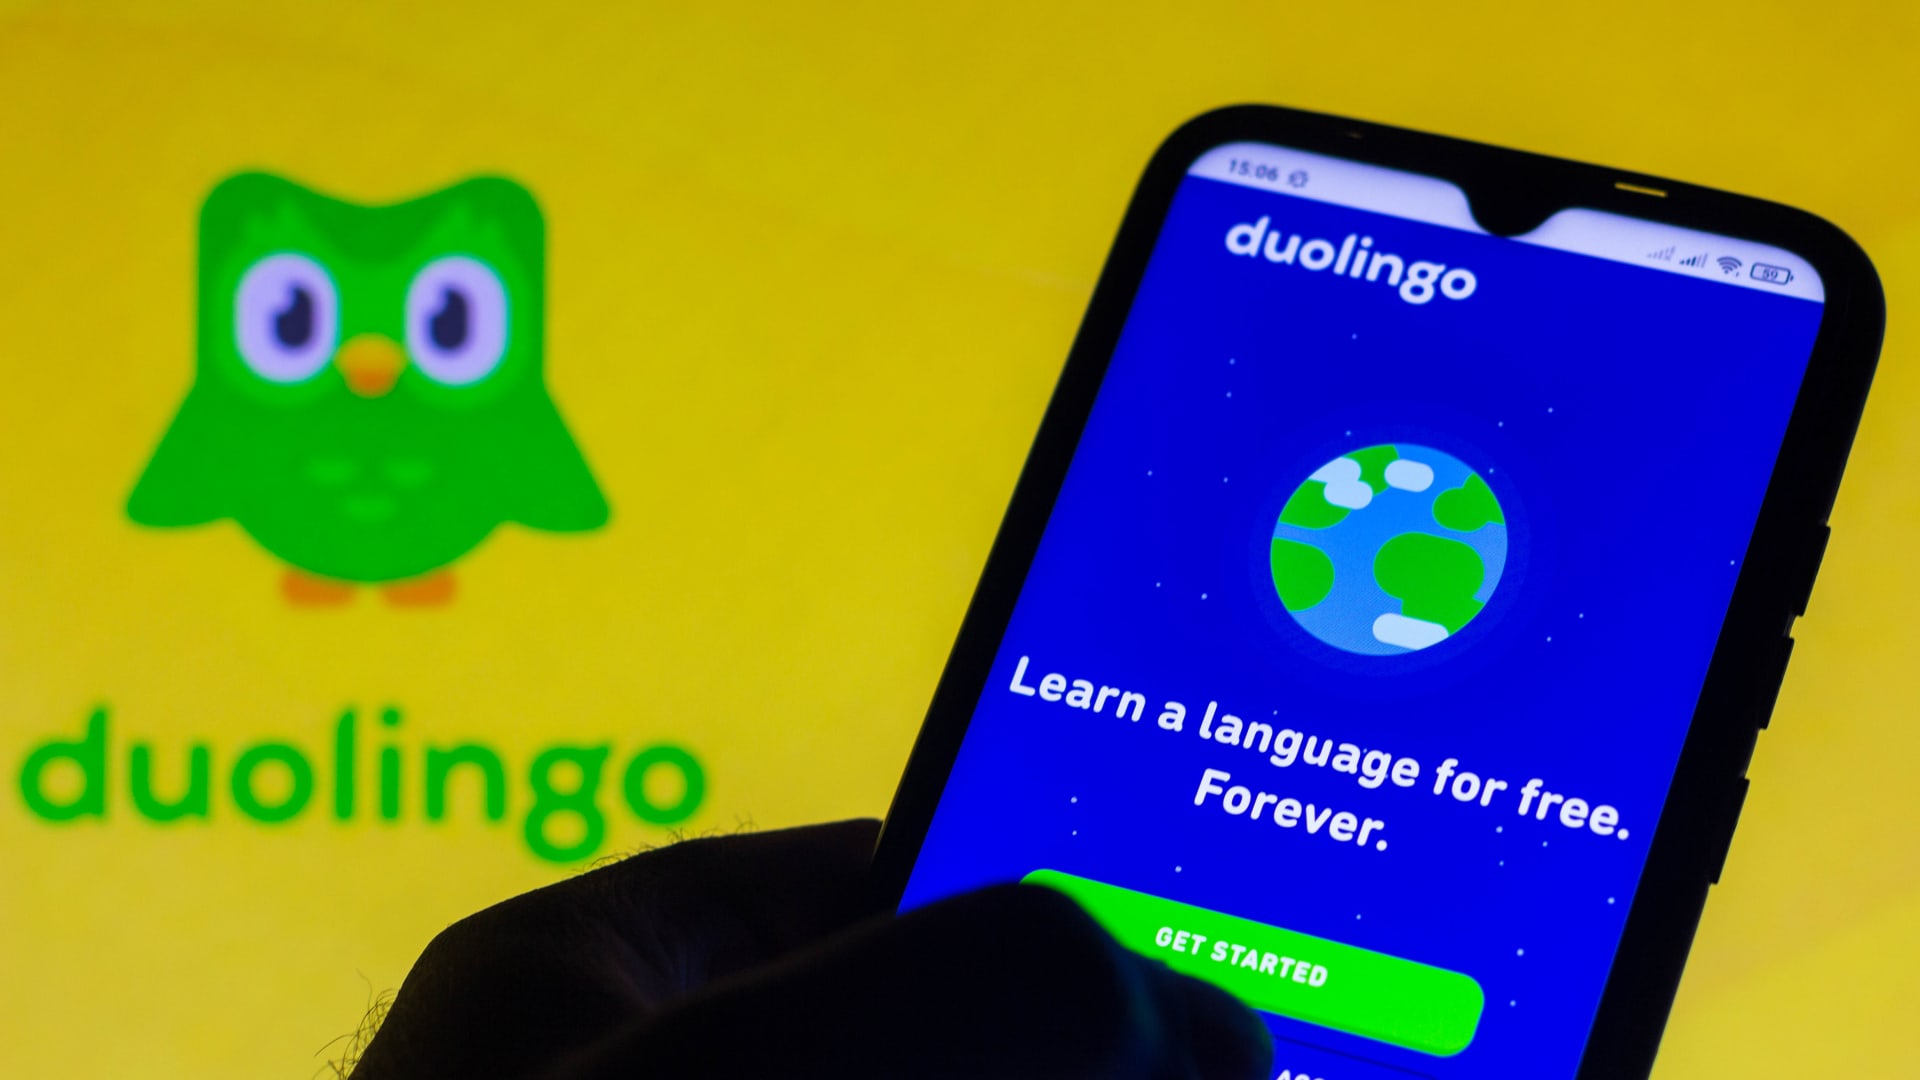 This language app with 40% upside is JPMorgan's favorite education play - CNBC